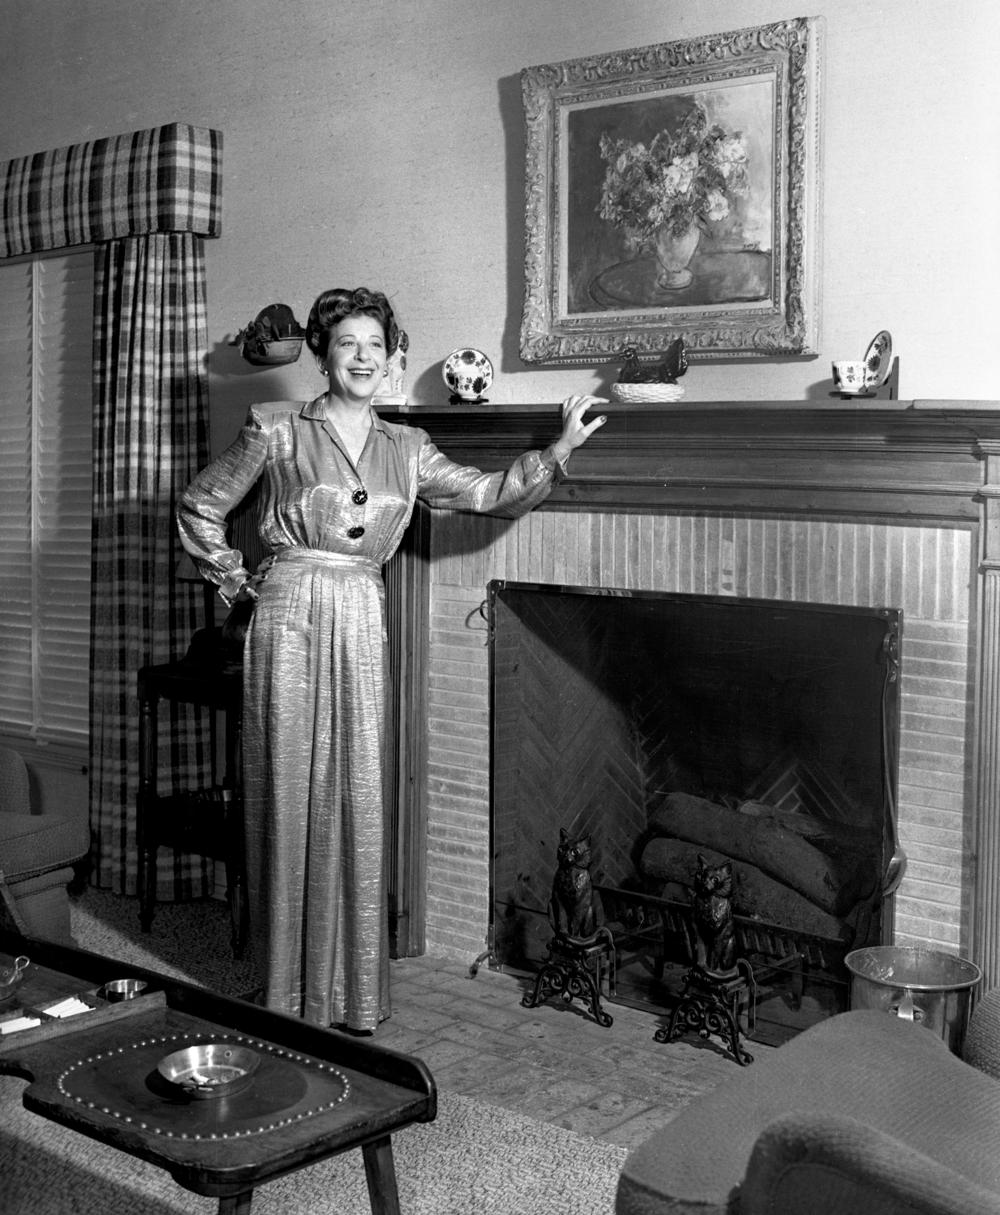 CBS Radio talent and comedienne Fanny Brice, at home, on August 15, 1944.